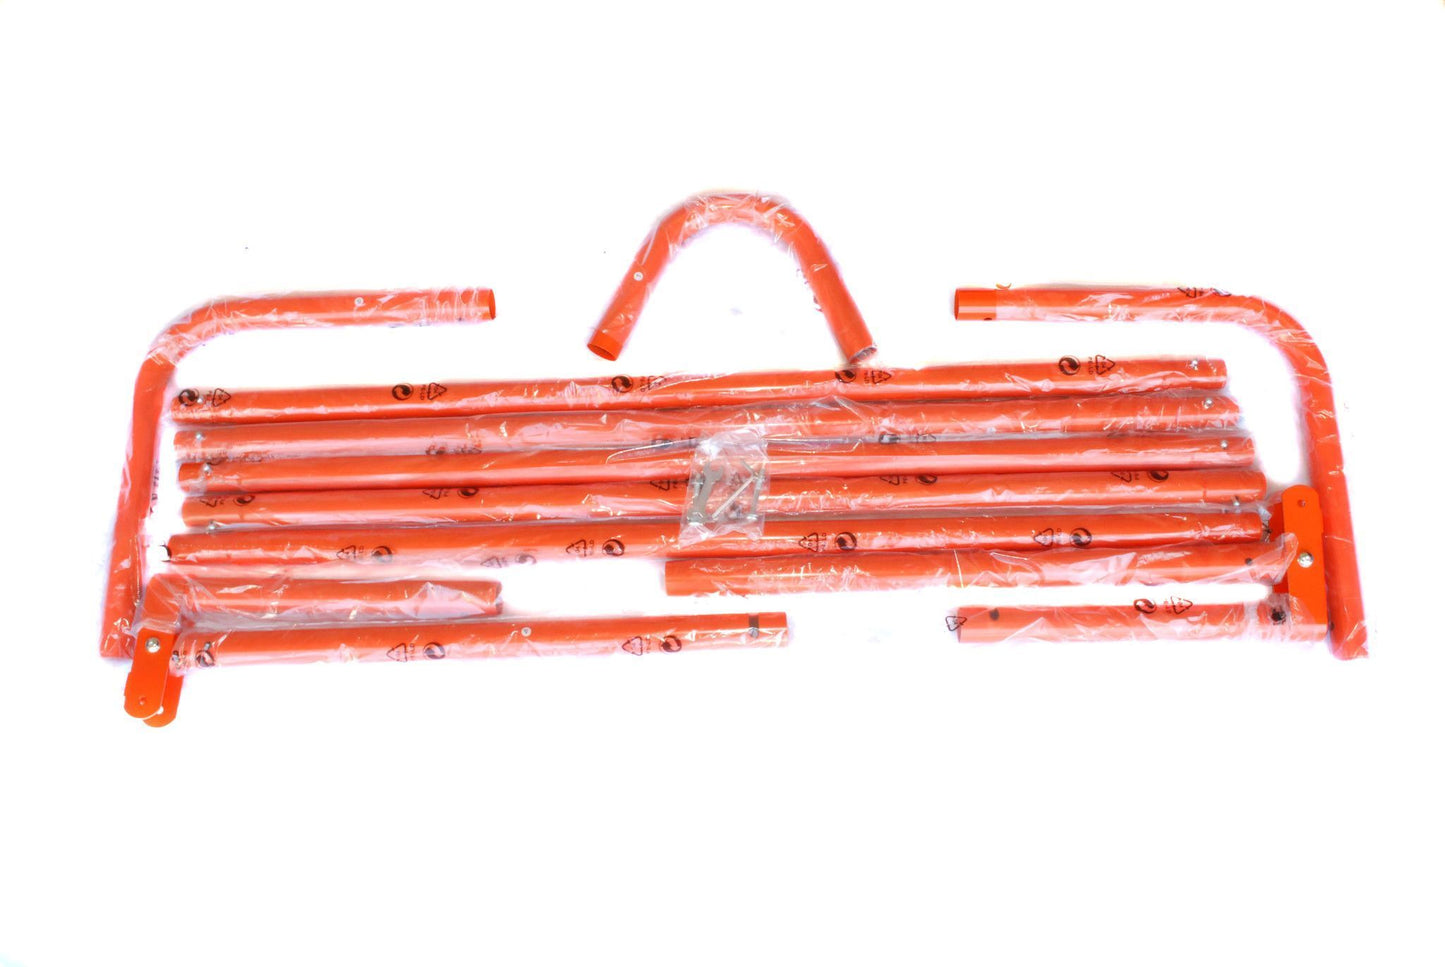 Folding Lacrosse Goal - 30 lbs, 6'x6'x7' by Crankshooter® Included w/ 4mm, 5mm or 6mm White Net - FREE Shipping.